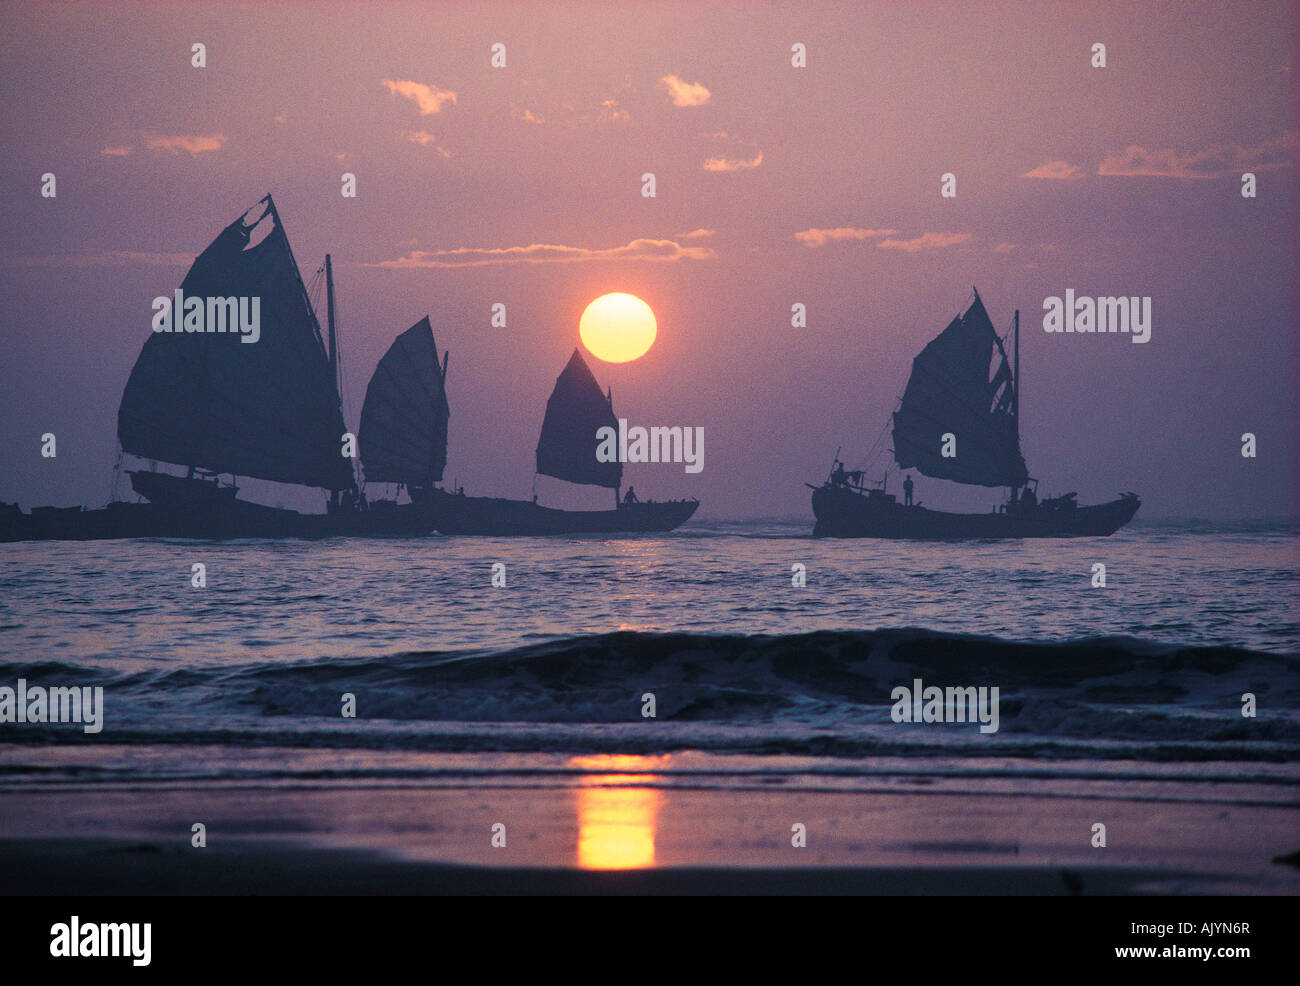 China. Guangdong (Canton). Shantou area. Dezhou Island. Early morning view of Chinese trading junks off the coast. Stock Photo